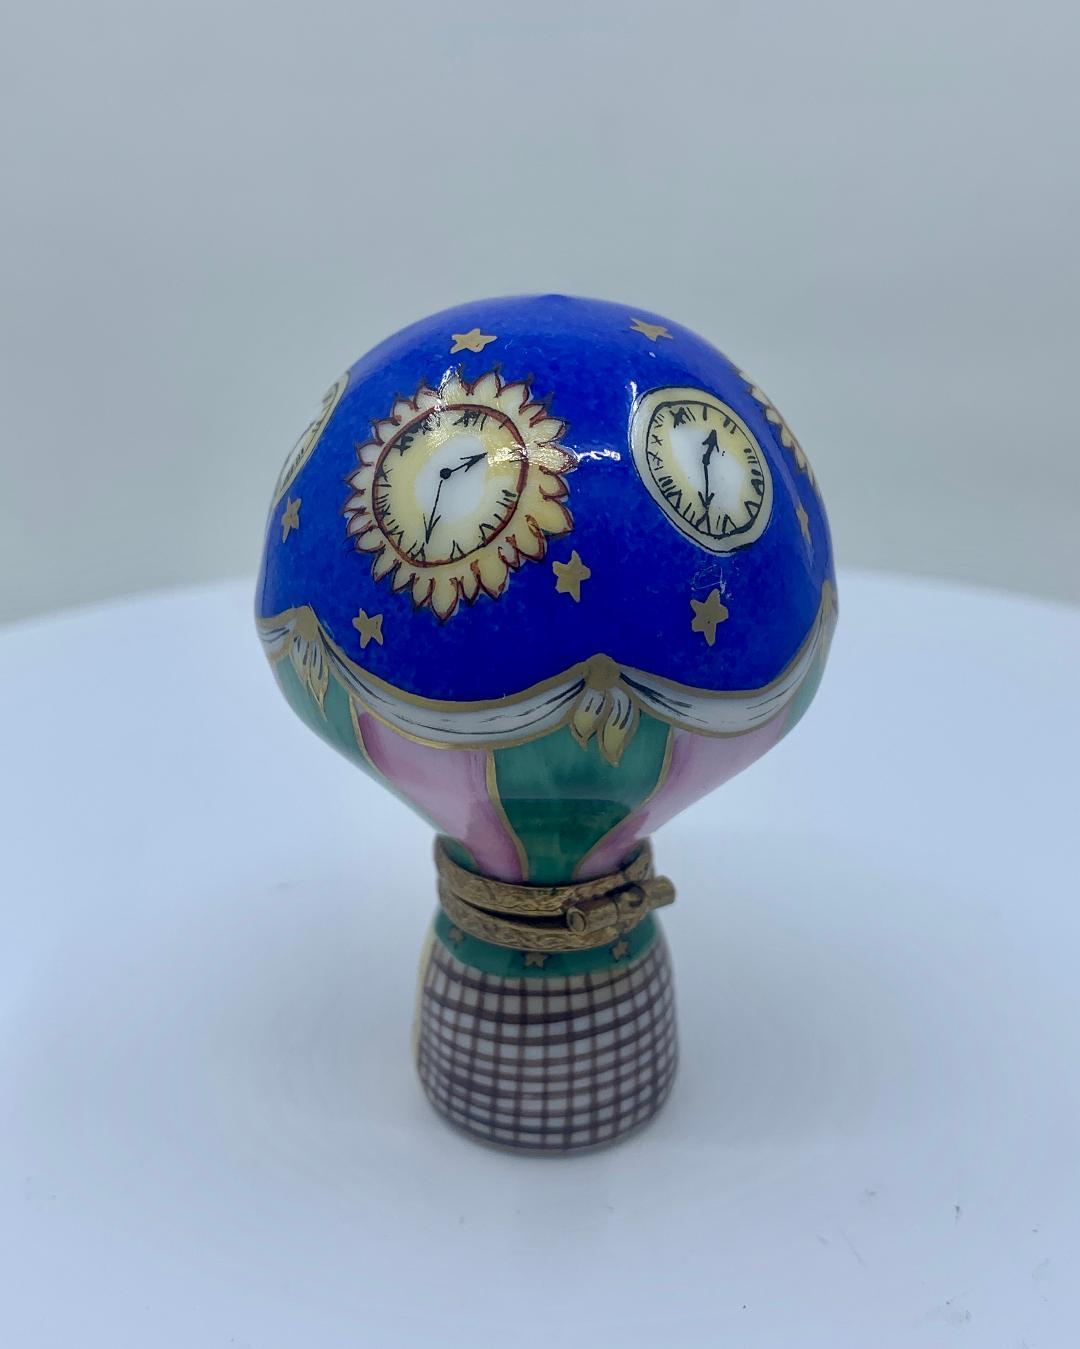 Collectible and unique, Limoges Rochard porcelain miniature trinket box is handmade and hand painted in France and features a very detailed vivid cobalt blue hot air balloon with celestial gold stars and four sun clocks interspaced between round